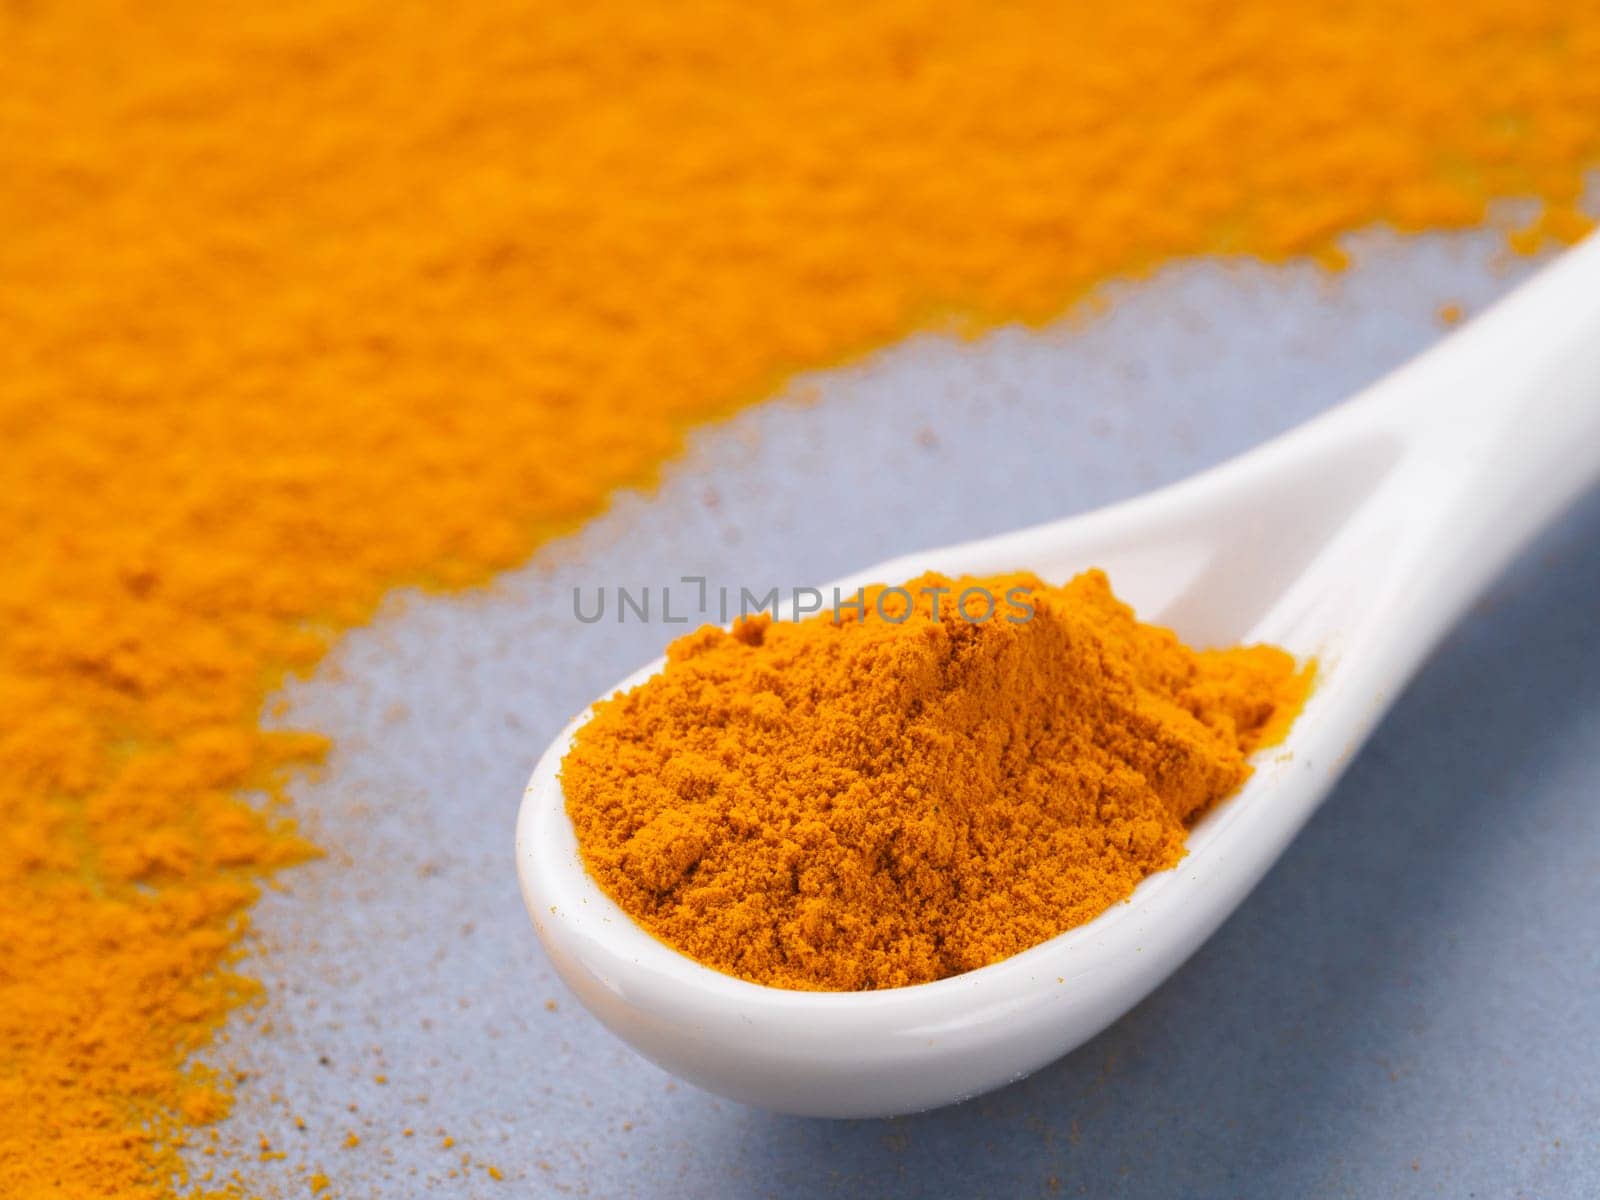 Turmeric Powder or Curcuma longa and white spoon with turmeric powder on gray background. Copy space for text.